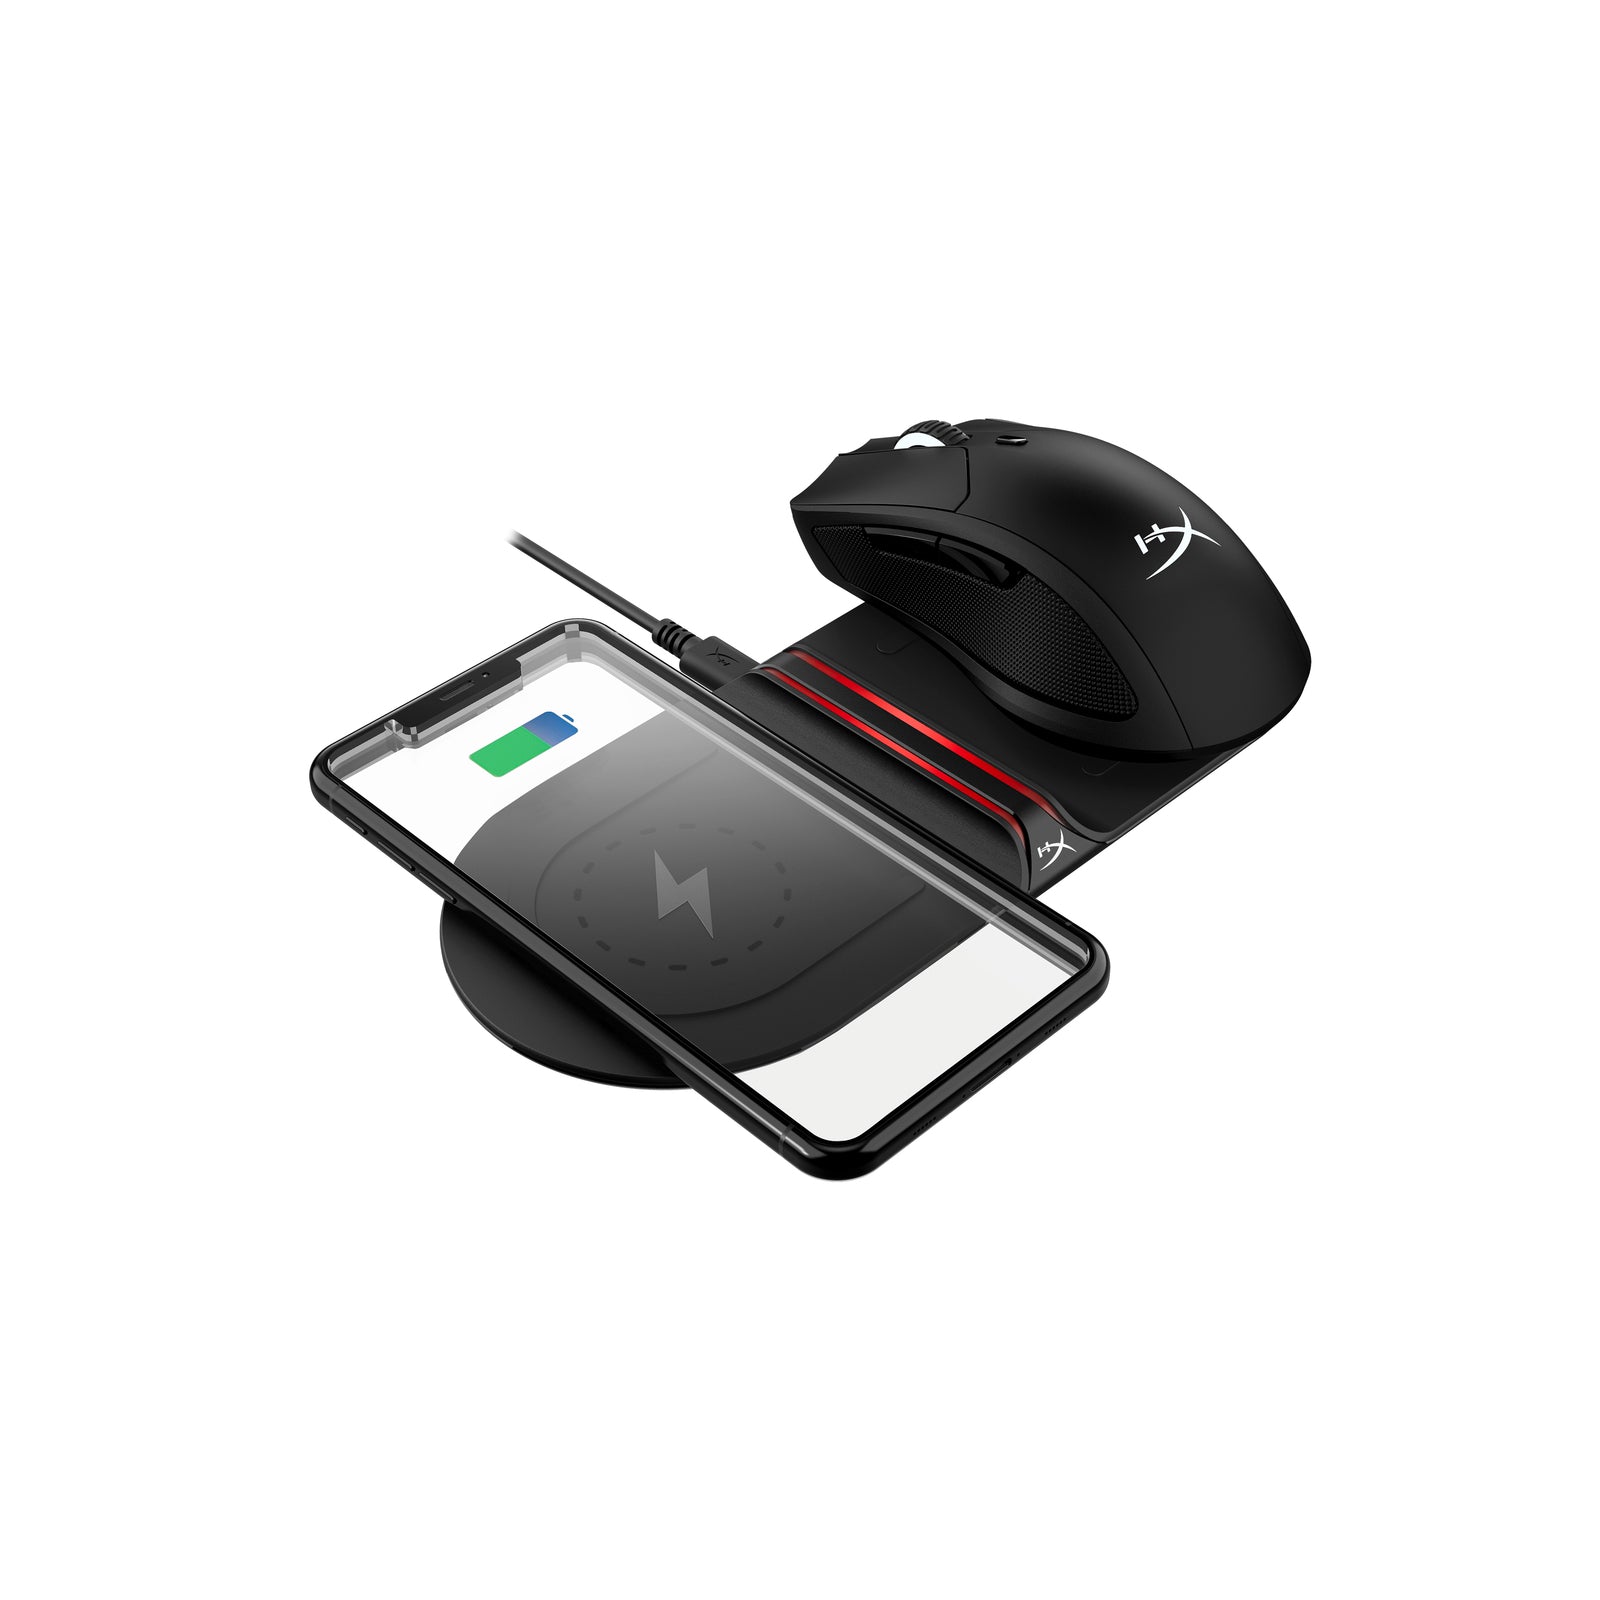 HyperX ChargePlay Base - Qi Wireless Charger (EU)